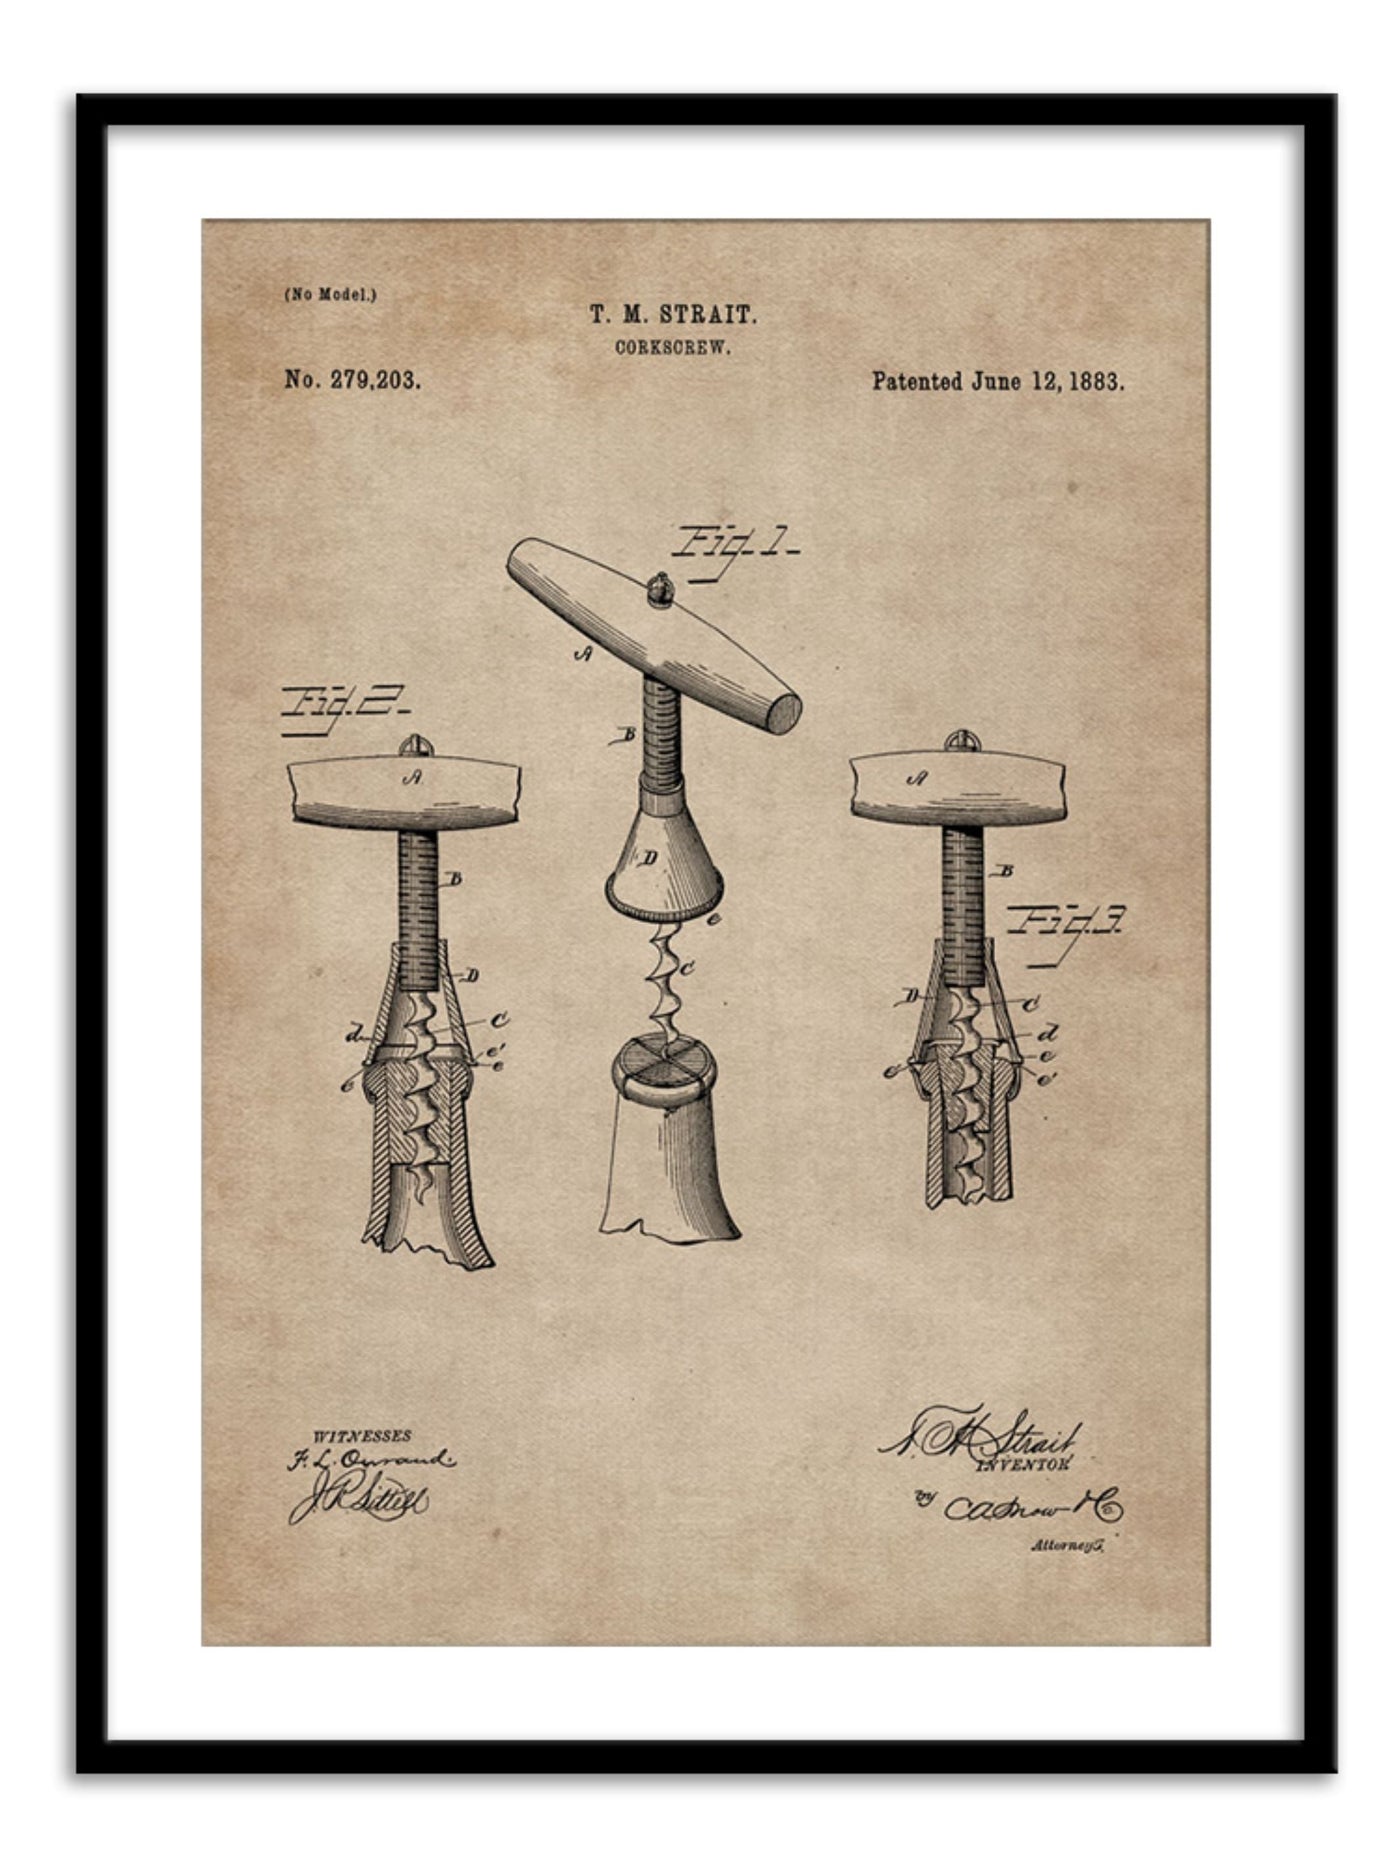 Patent Document of a Cork Screw Wall Prints